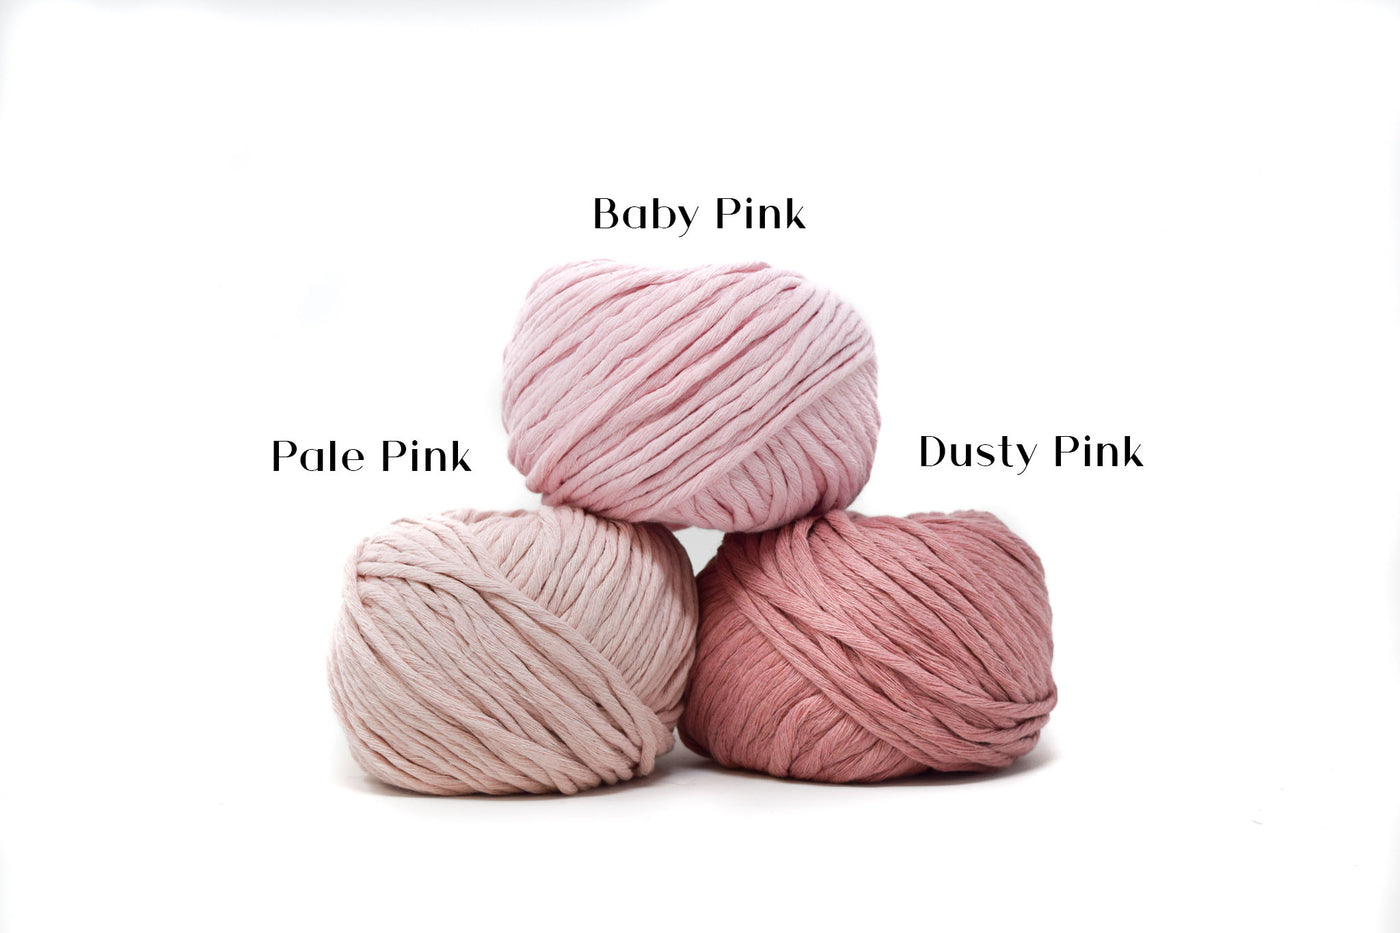 COTTON BALL ZERO WASTE 3 MM - PALE PINK COLOR